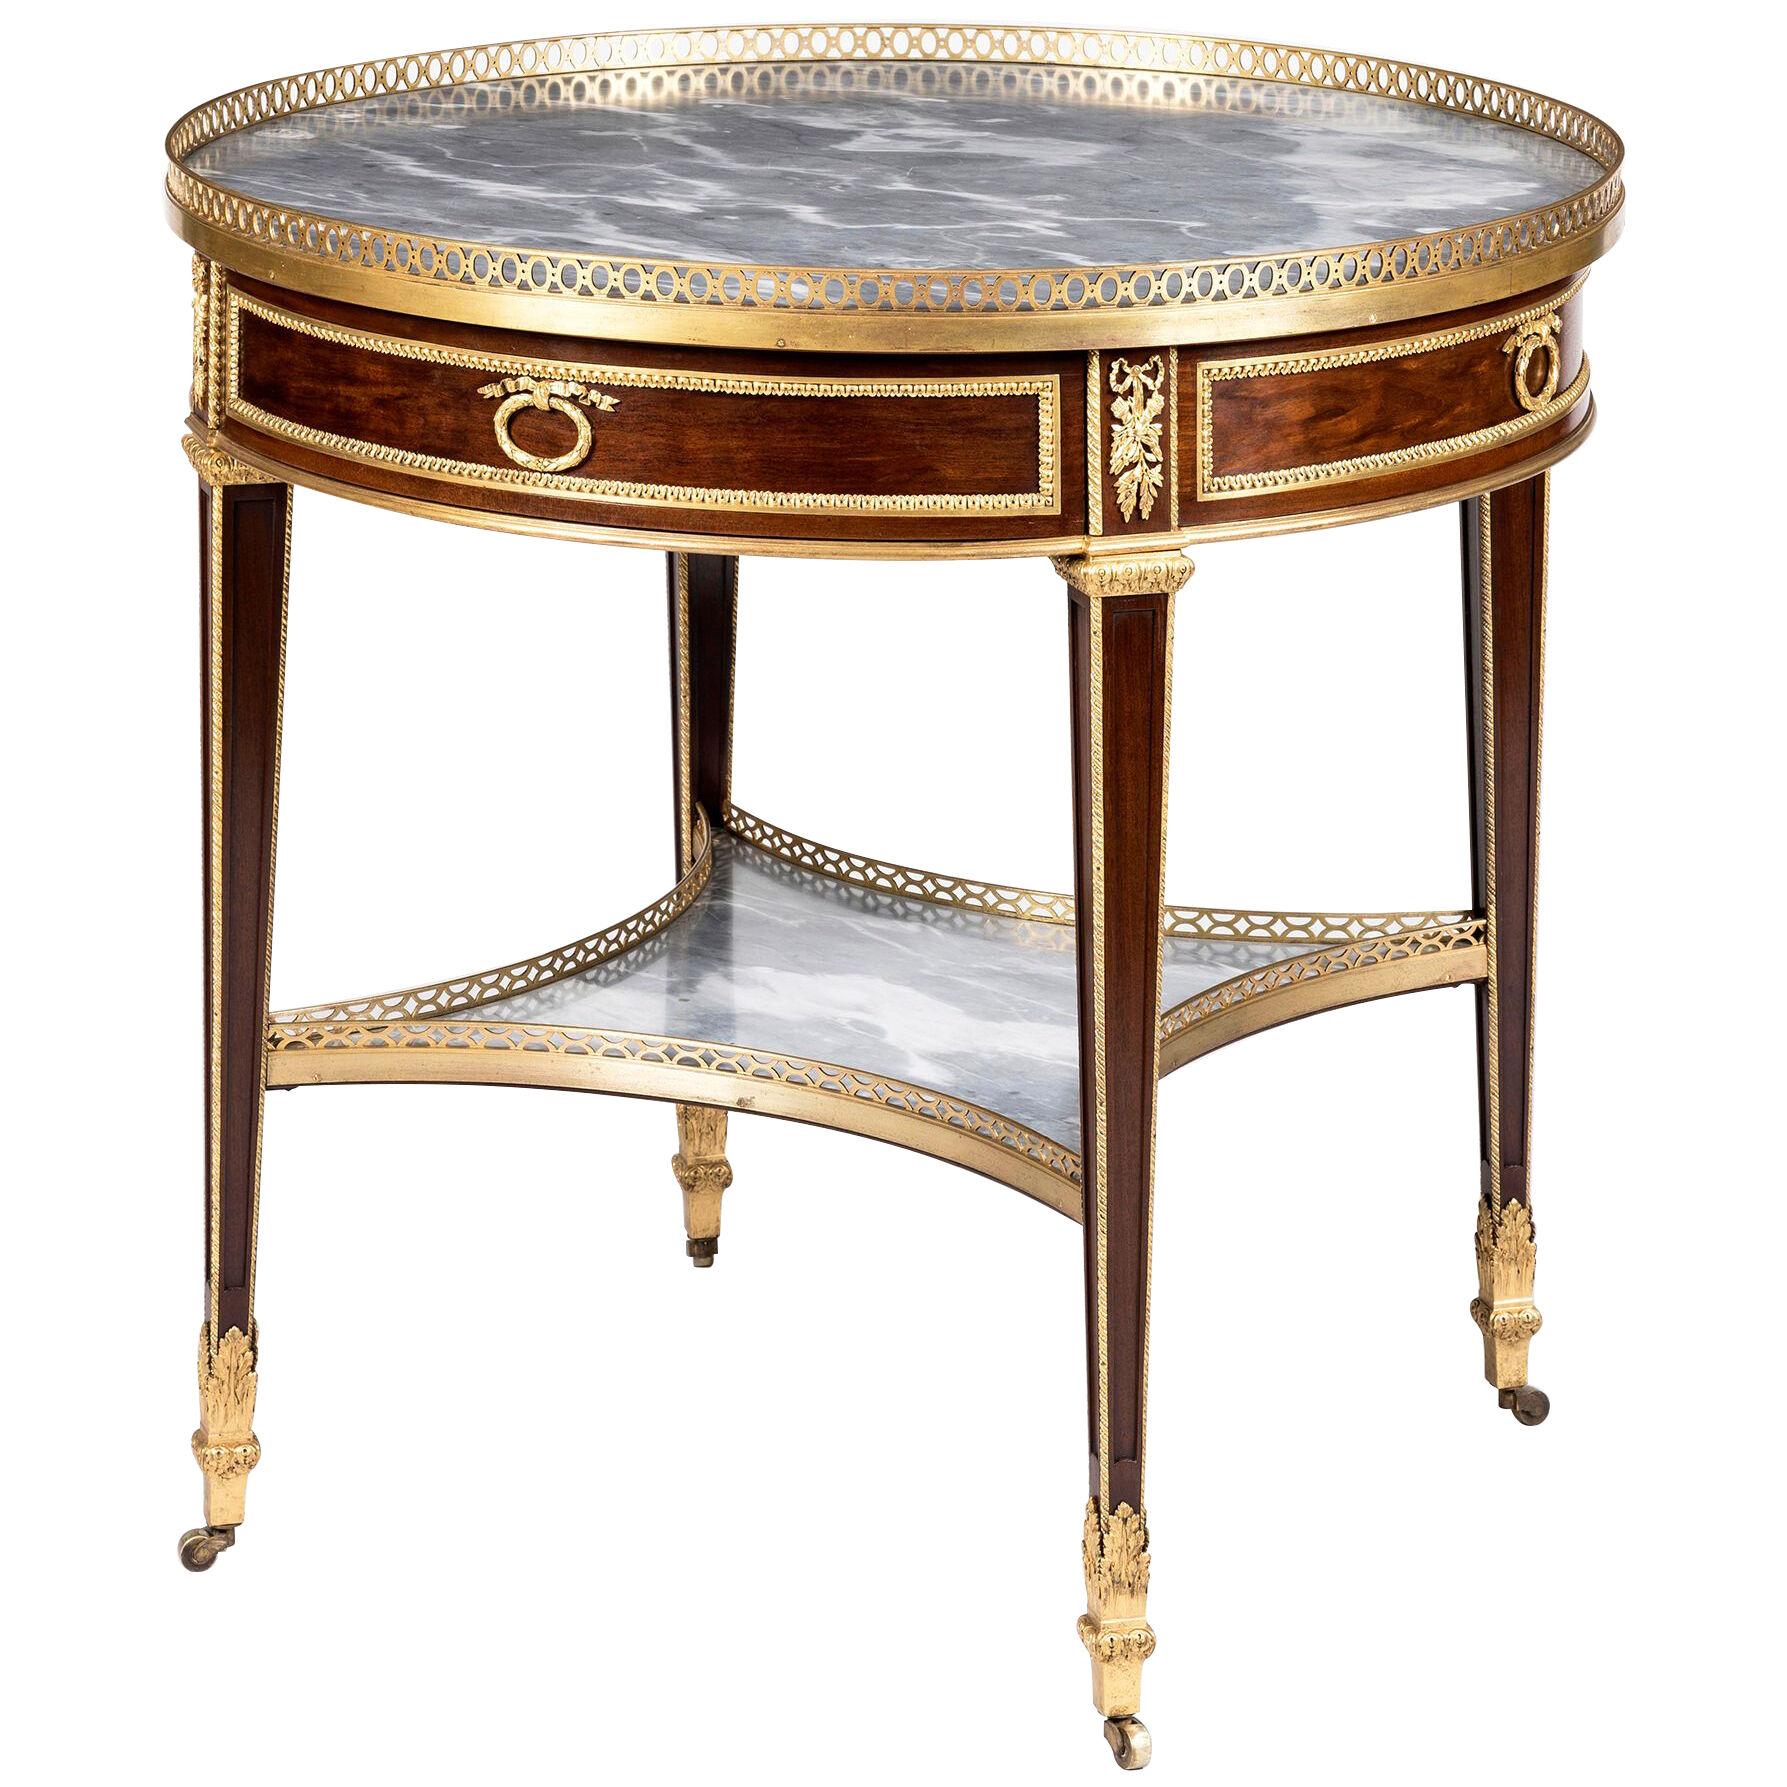 19th Century French Table in the Louis XVI Manner